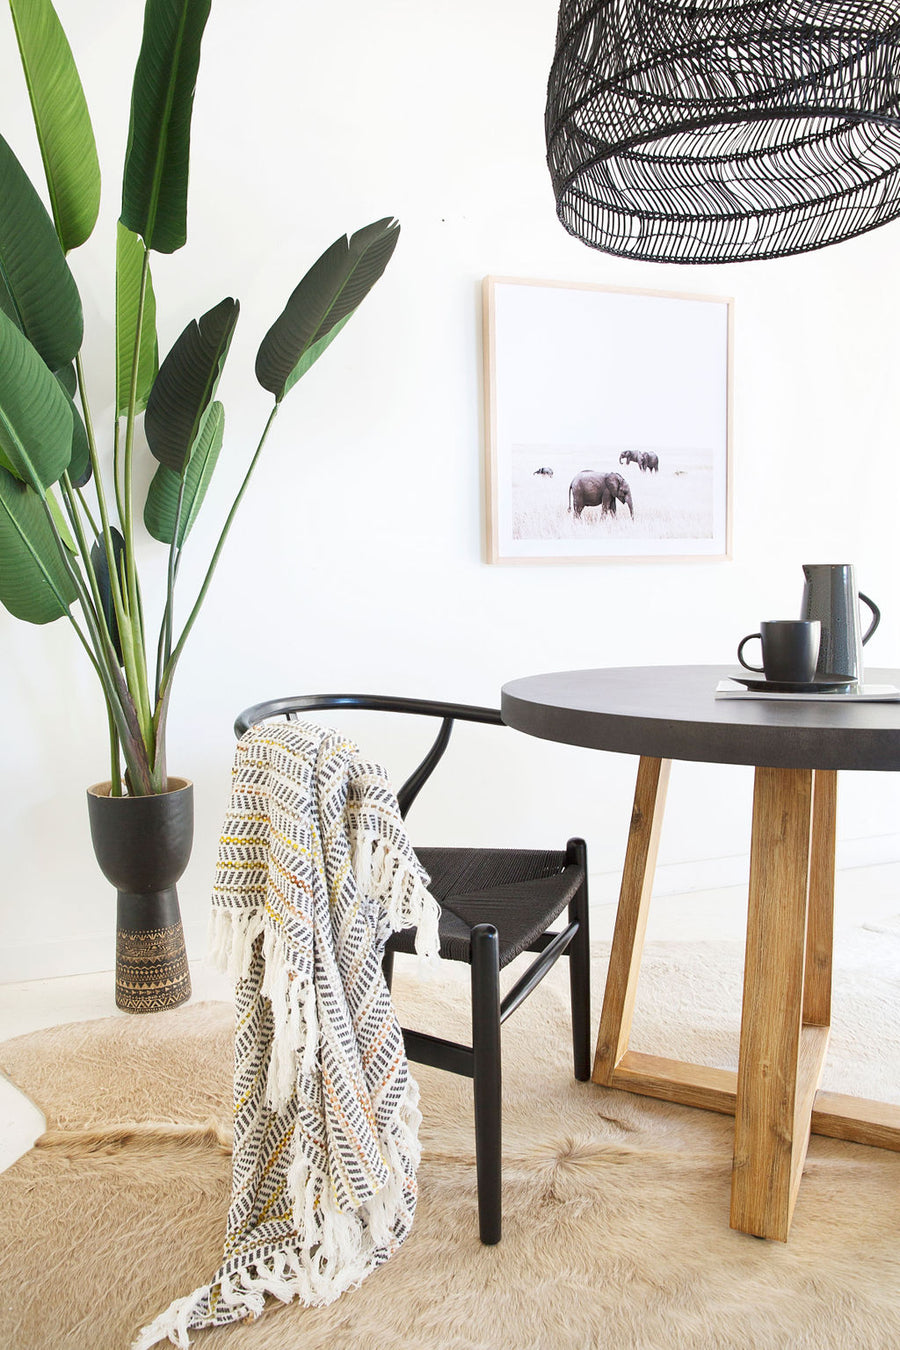 1.0m Alta Round Dining Table - Black with Light Honey Timber Legs - www.elkstone.com.au